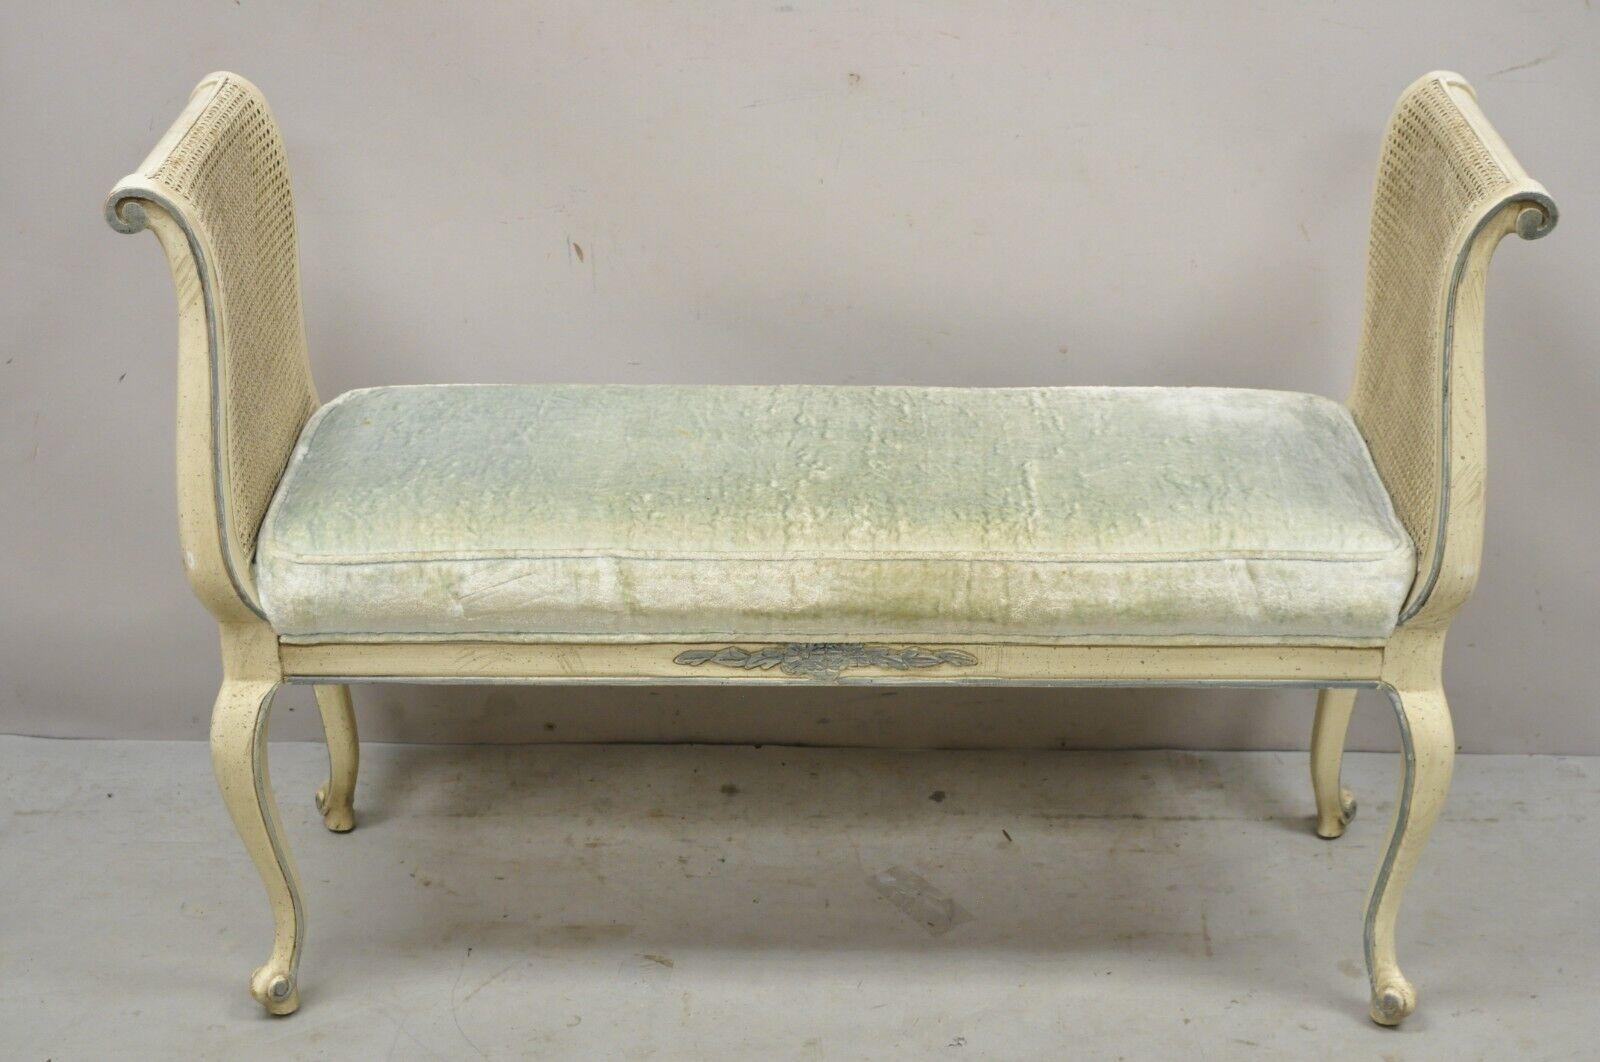 Vtg French Provincial Style Cream Painted Cane Cabriole Leg Window Bench w/ Arms 3